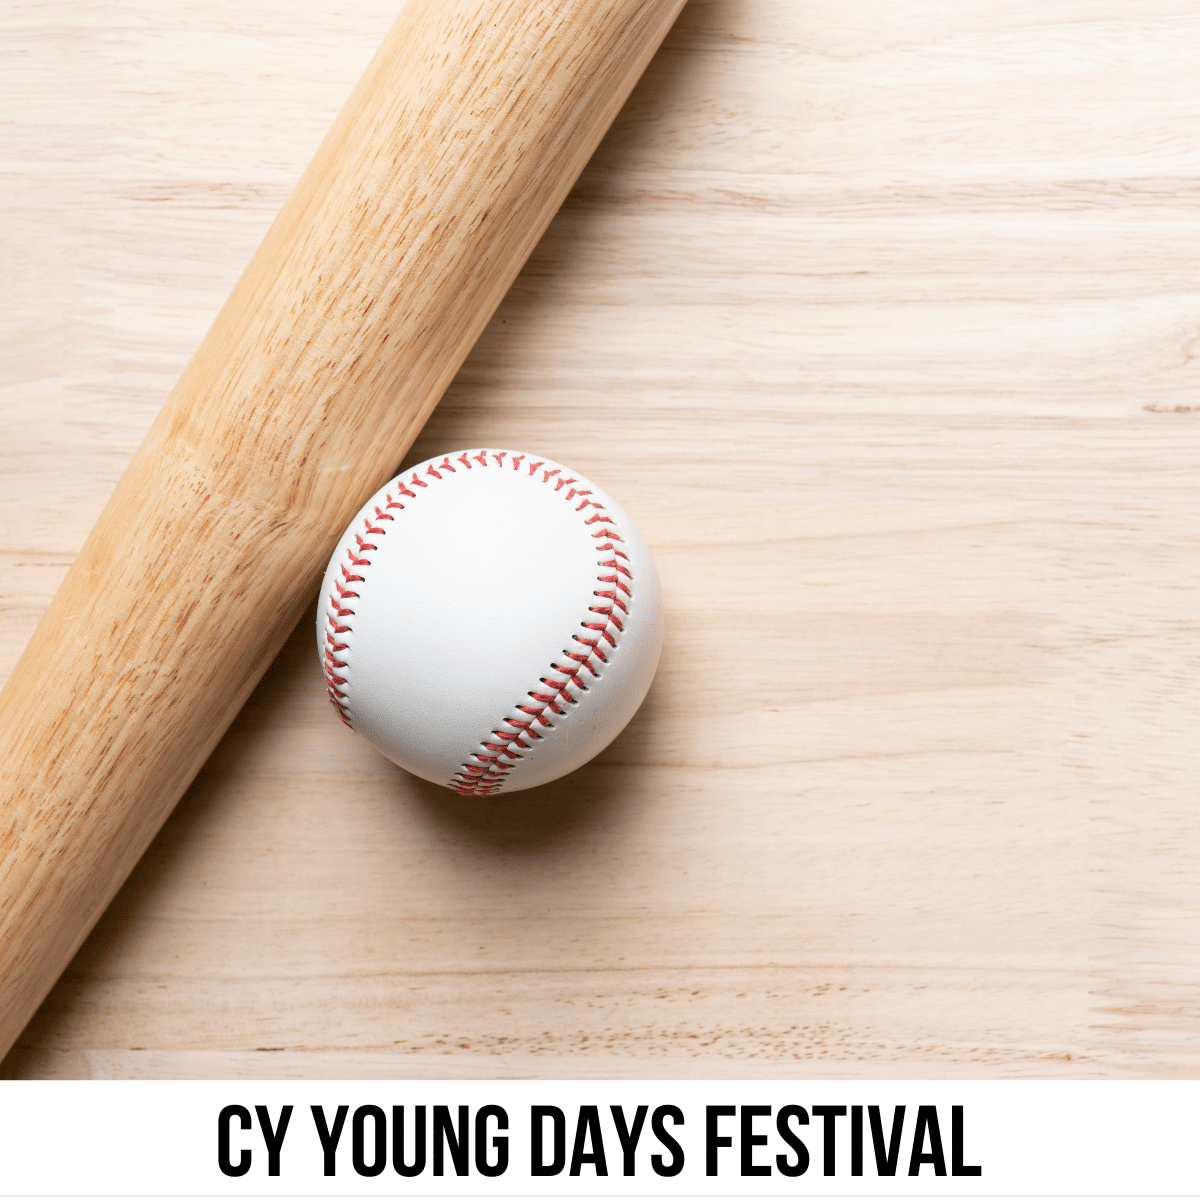 A square image of a closeup photo of a baseball bat and a baseball. A white strip across the bottom has text Cy Young Days Festival.